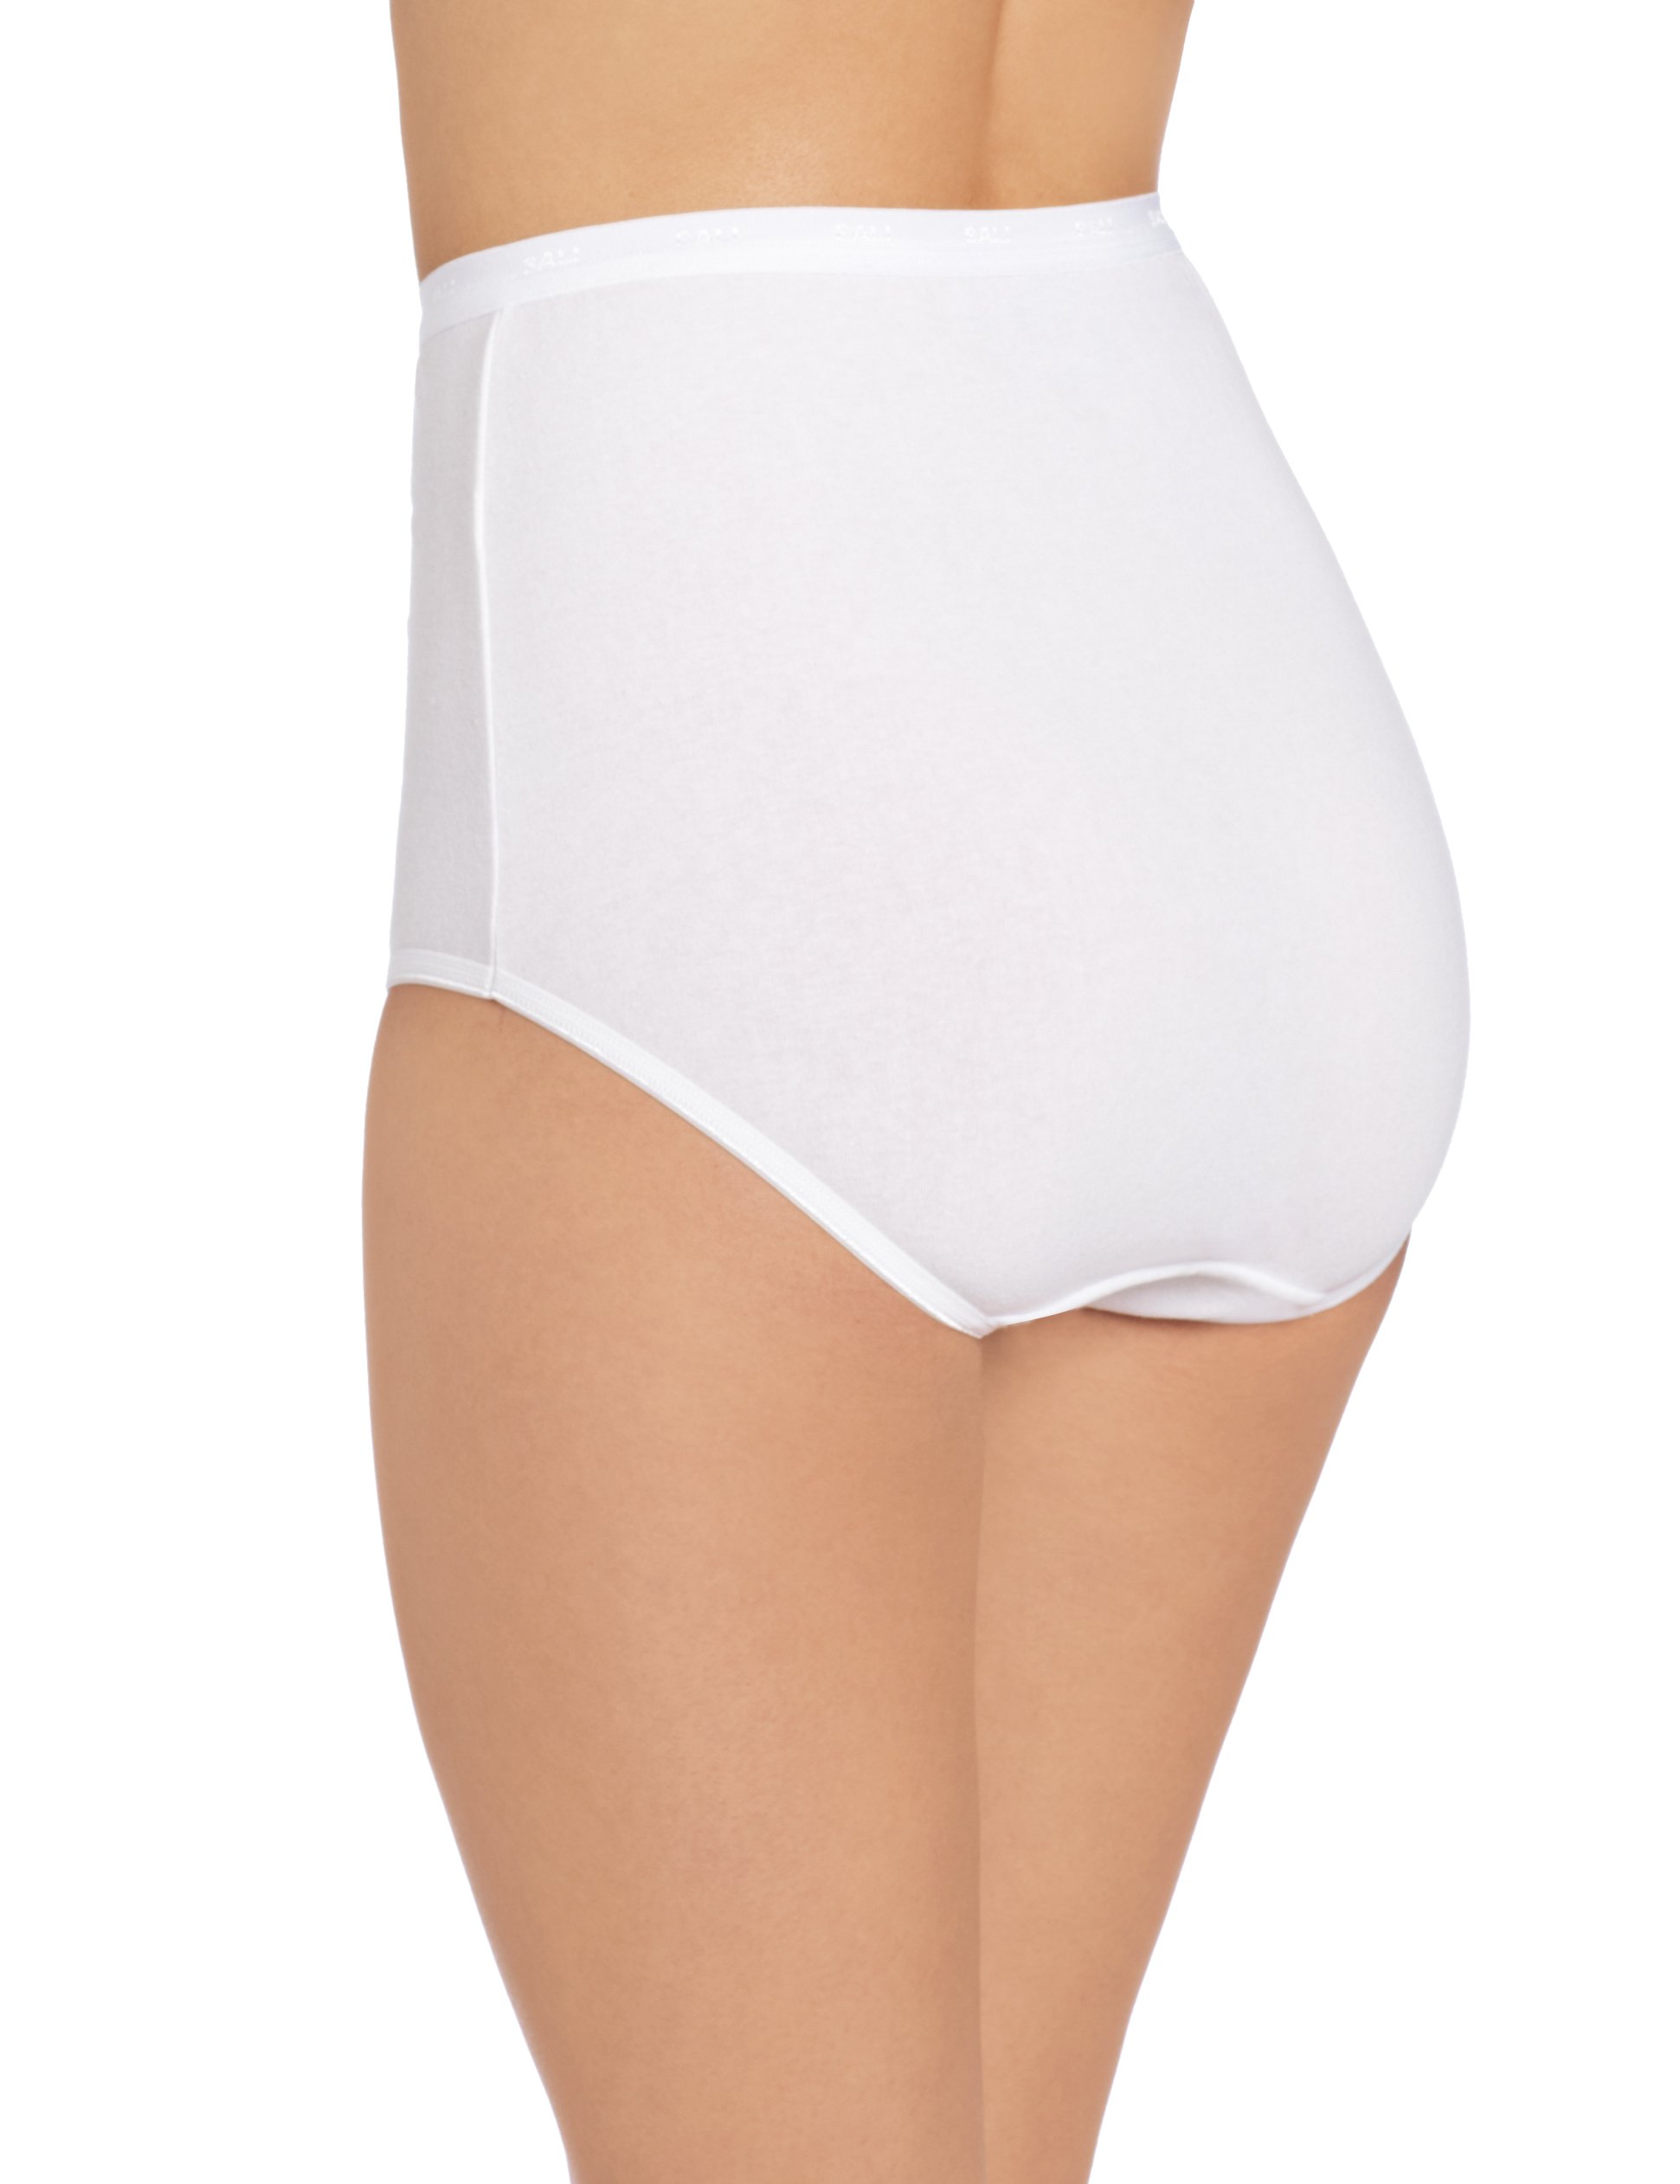 Bali Women’s Full-Cut-Fit Stretch Cotton Brief Panty, Women’s Cotton Underwear, Full Coverage Panties